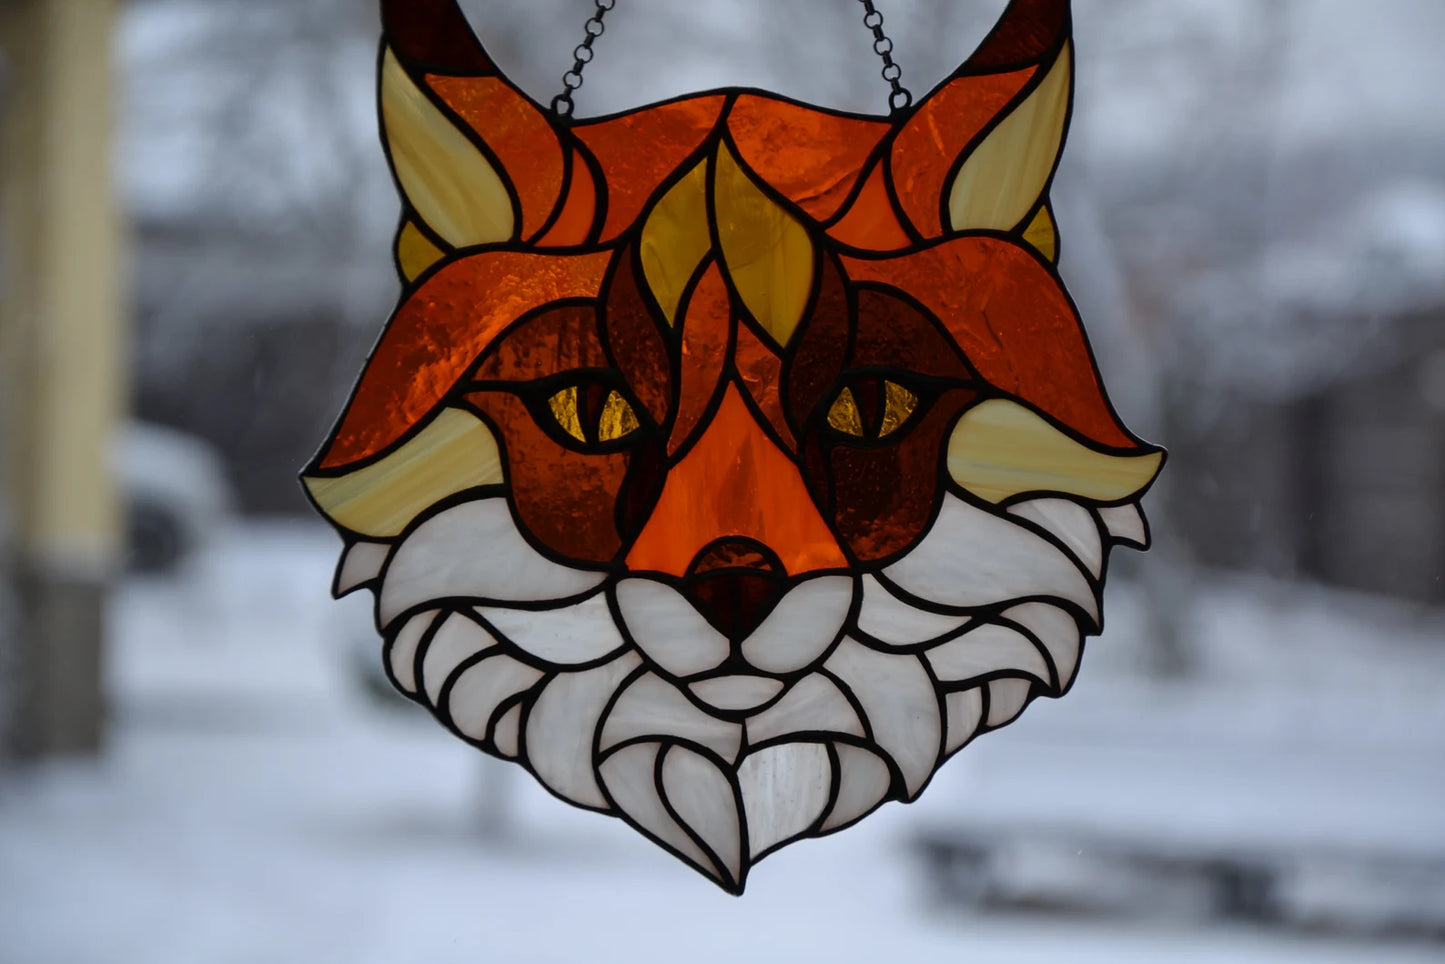 Stain glass suncatcher Fox Stained glass window hanging Glass animals Art decor Mother's day gift Wall decor Window pendant Christmas gift